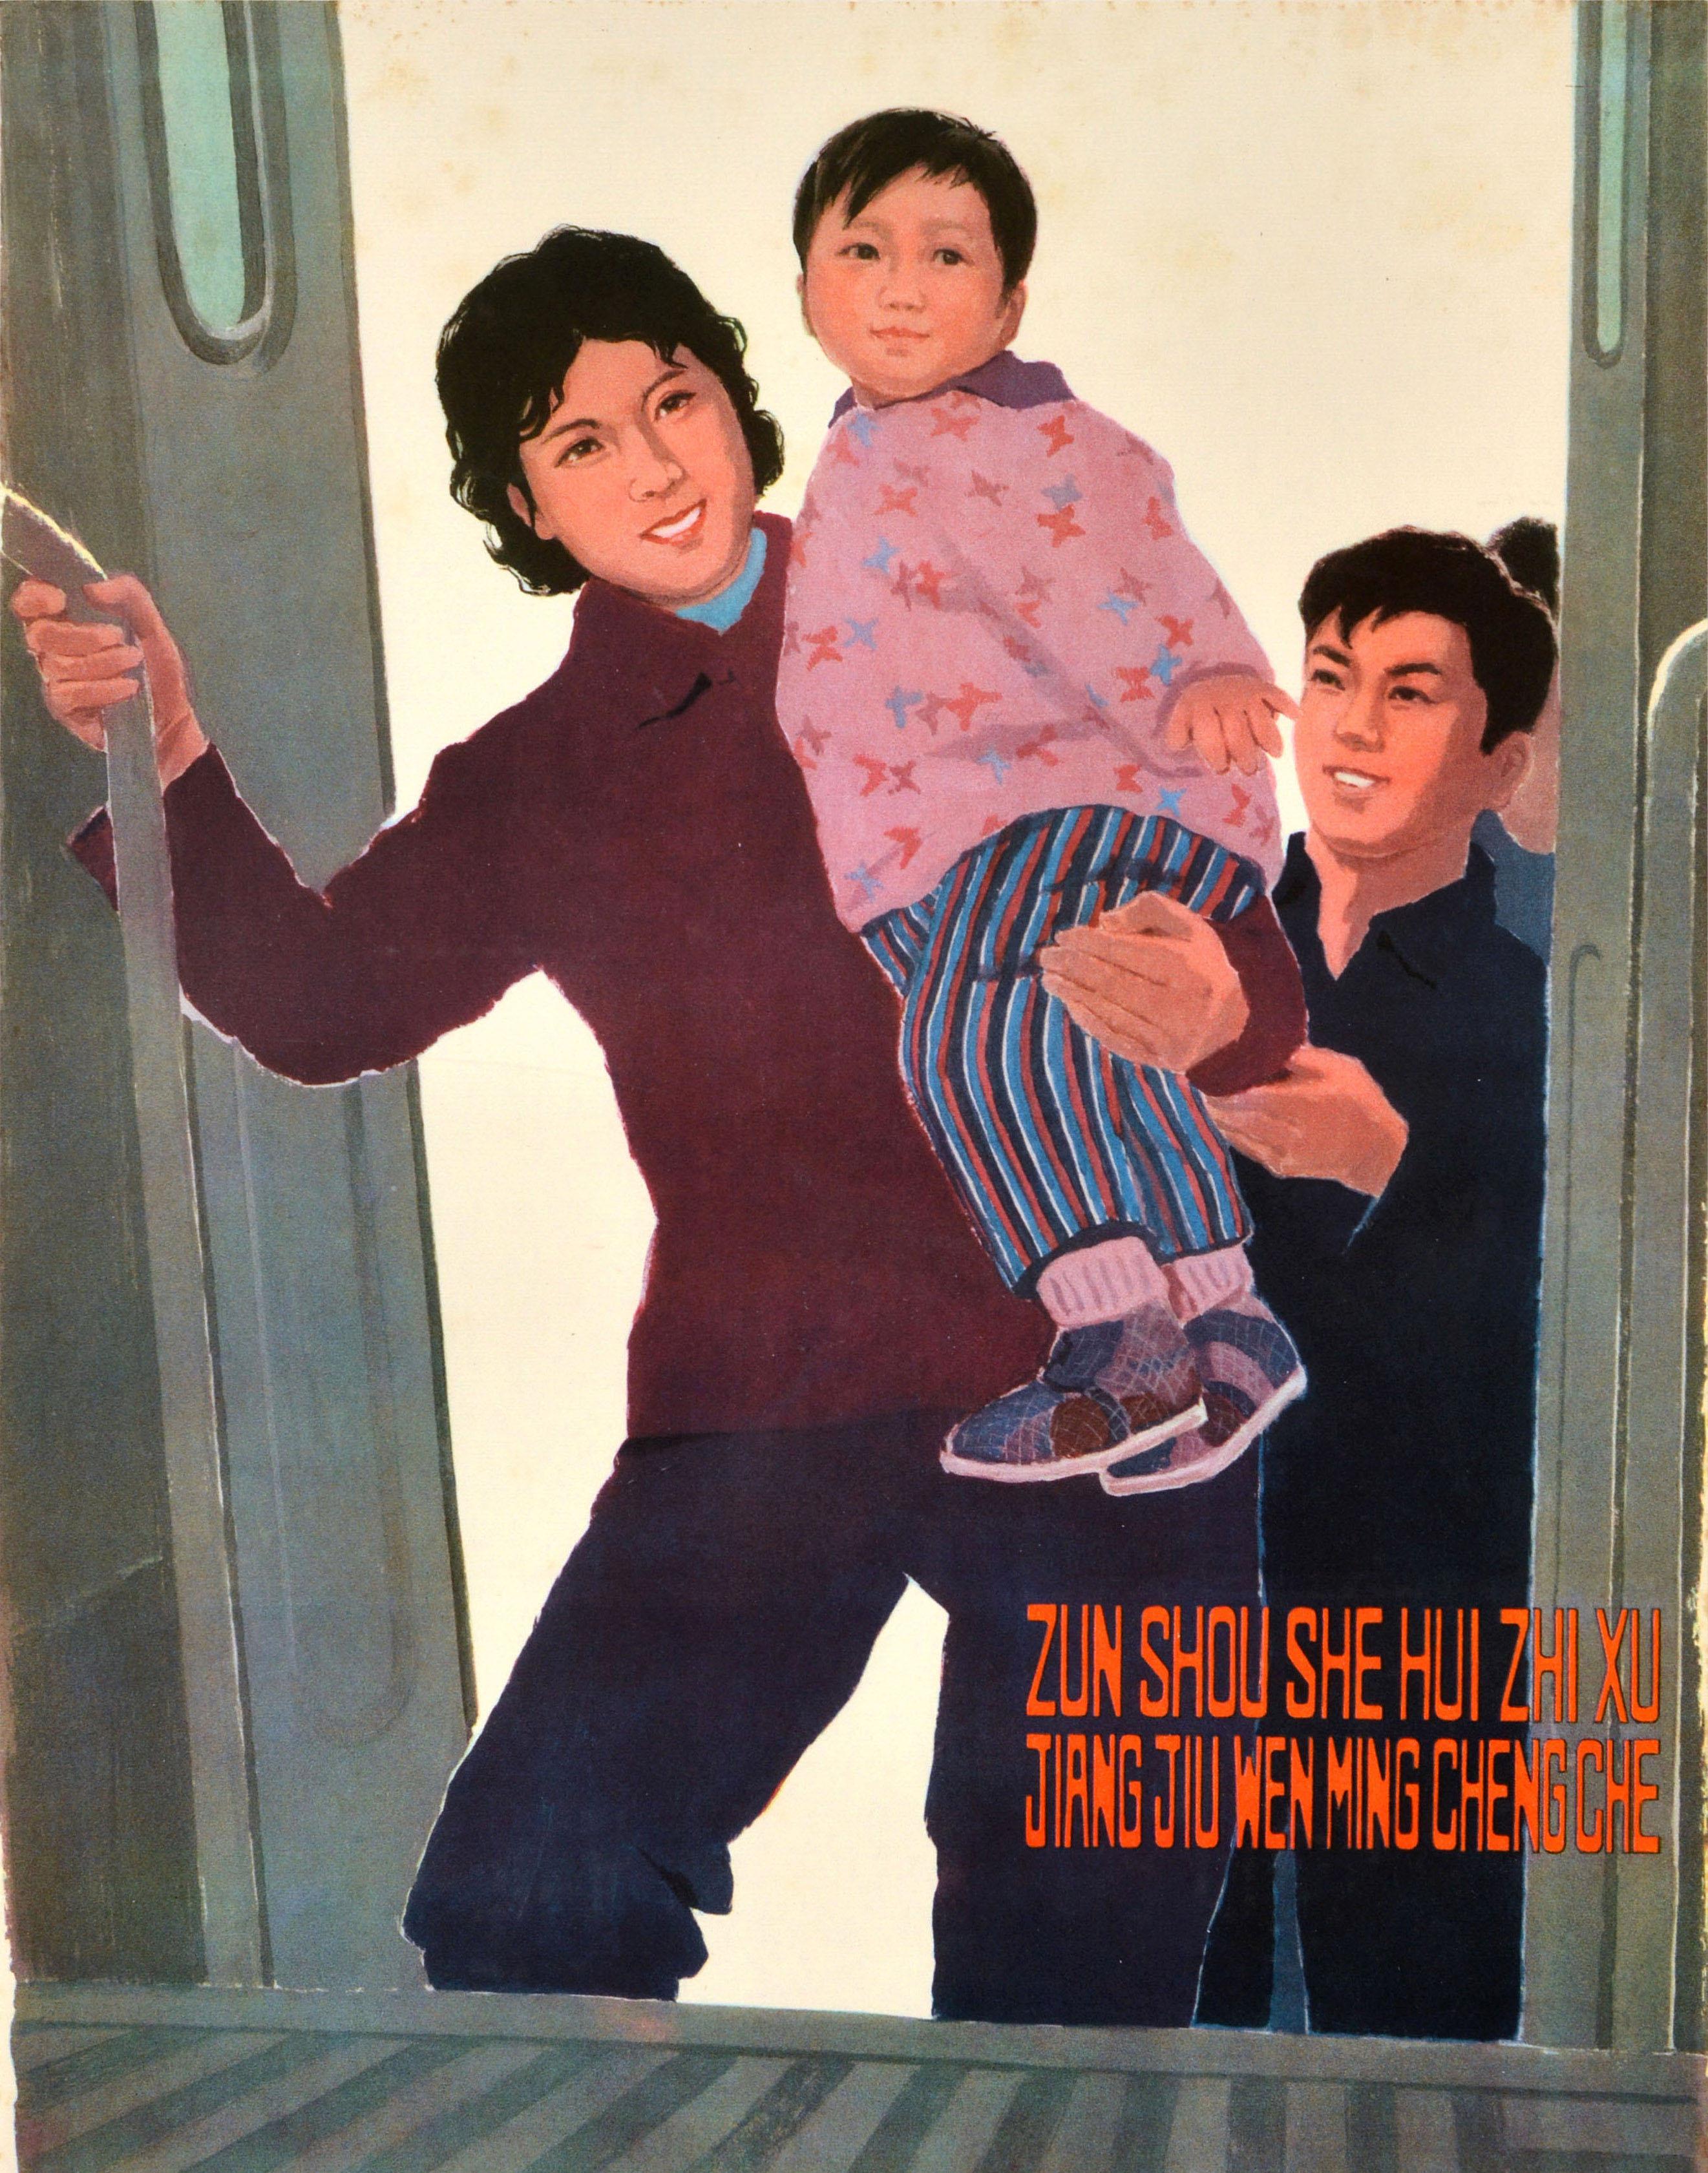 Original vintage Chinese propaganda poster - Observe social order and ride in a civilised manner / 遵守社会秩序讲究文明乘车 - featuring a public transport illustration showing a mother carrying a child up the stairs helped by a young man behind them, the other